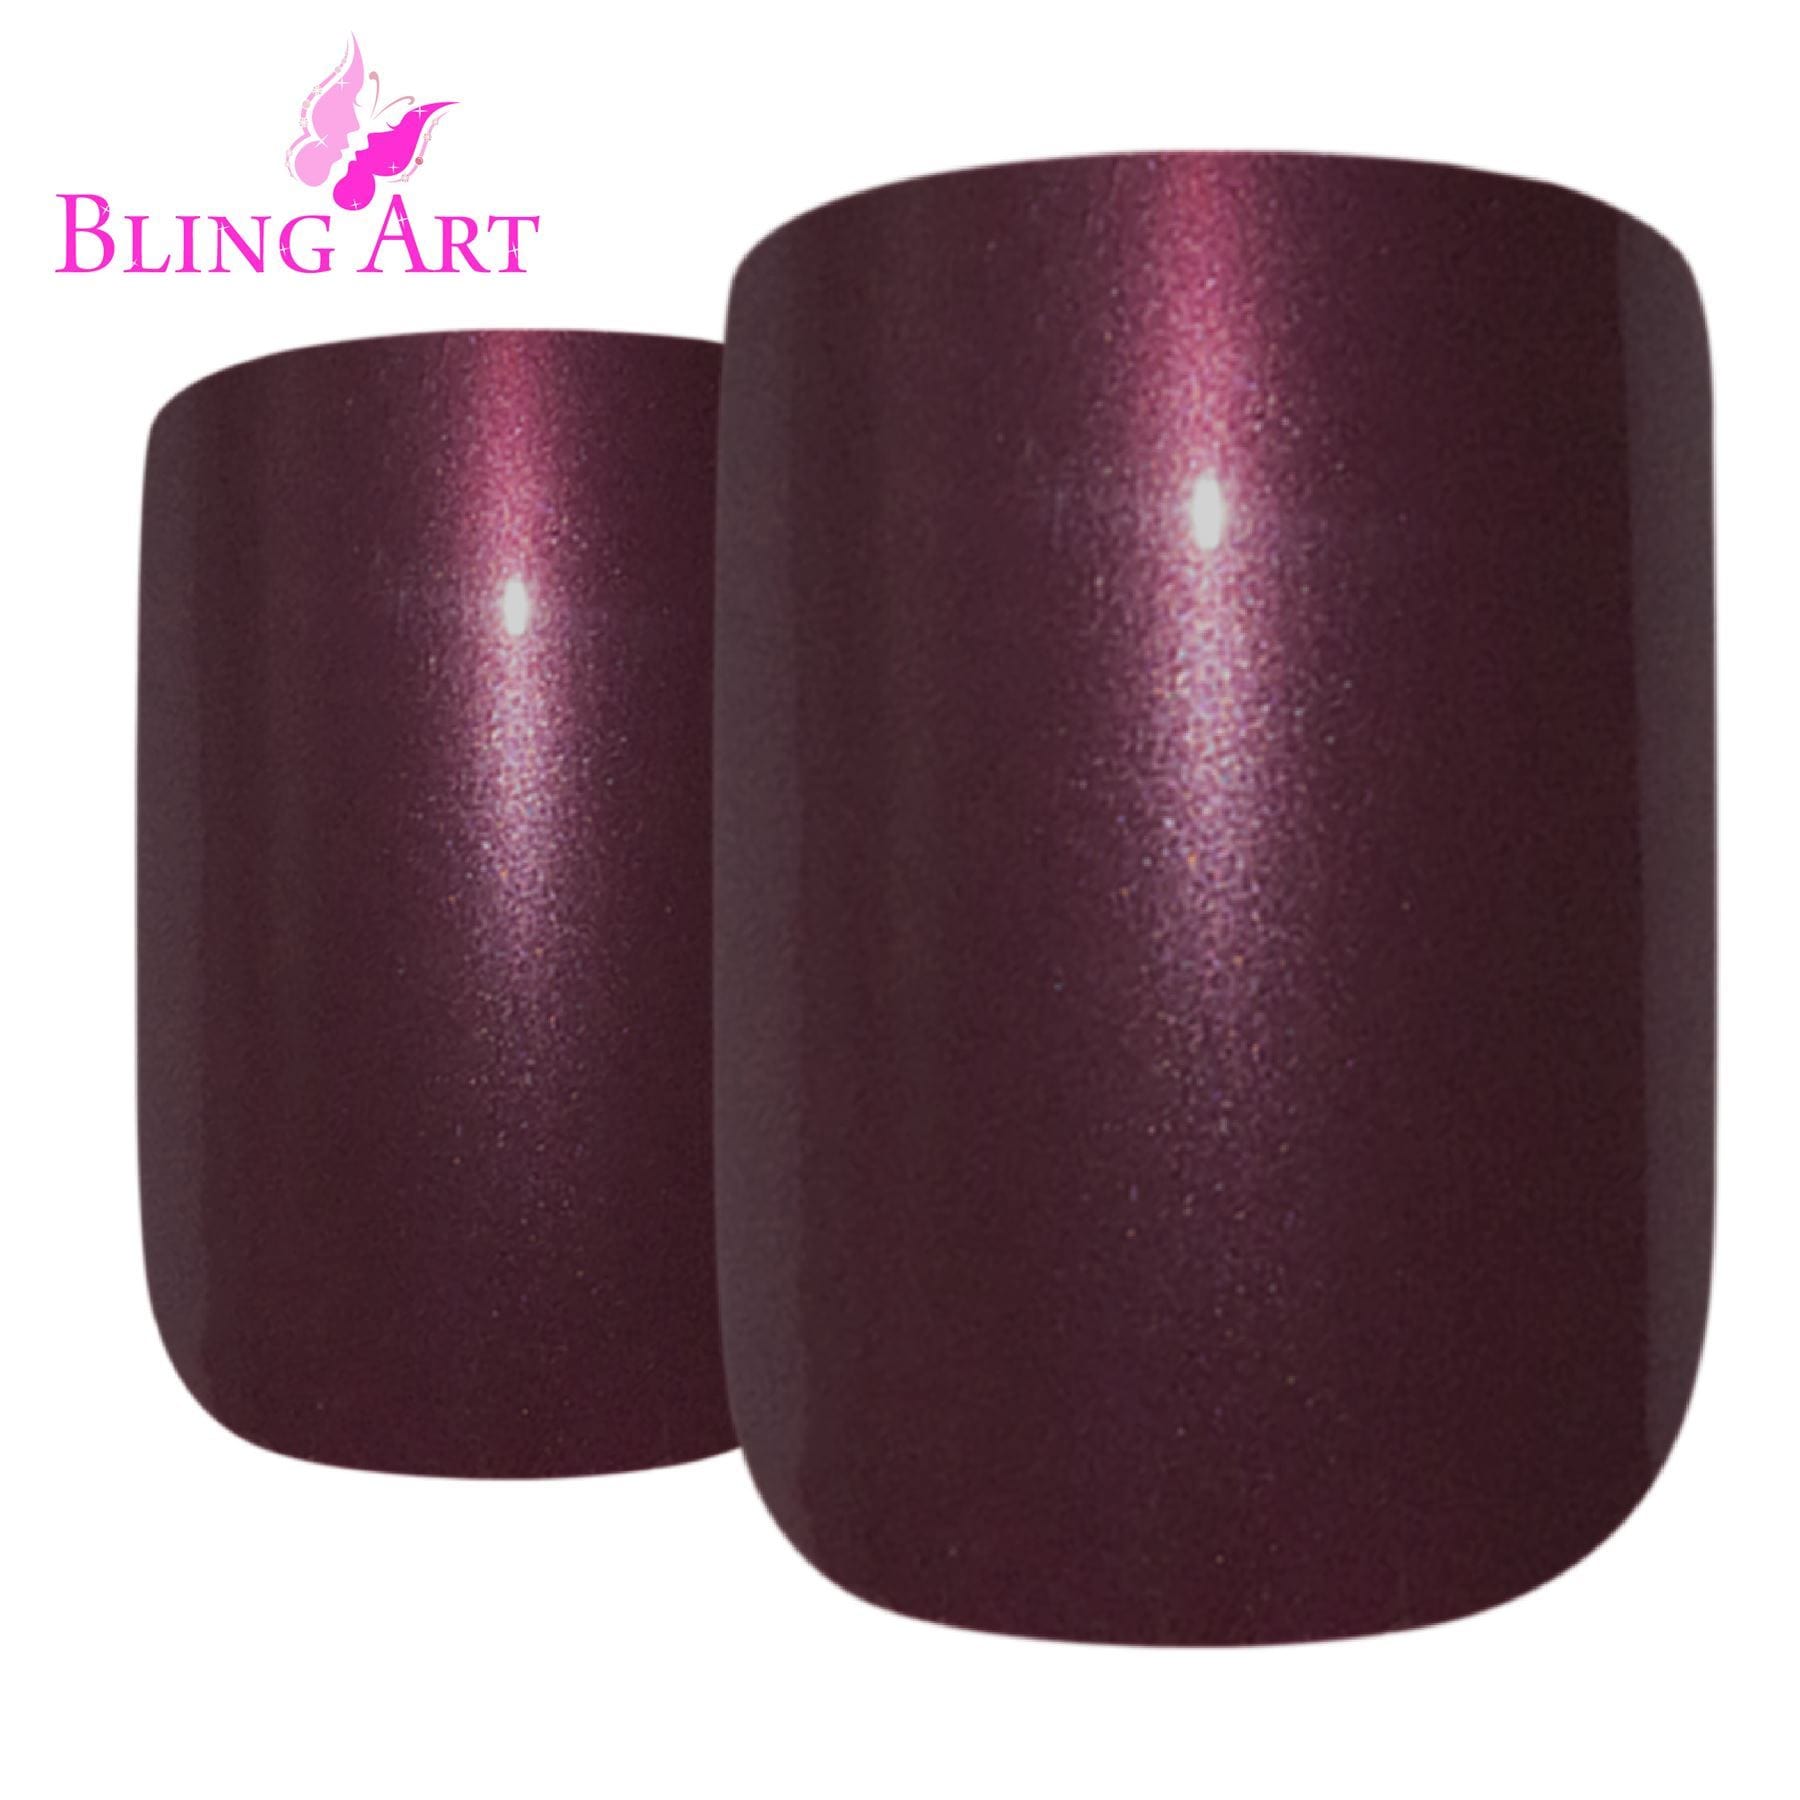 False Nails by Bling Art Brown Glitter French Squoval Fake Medium Acrylic Tips